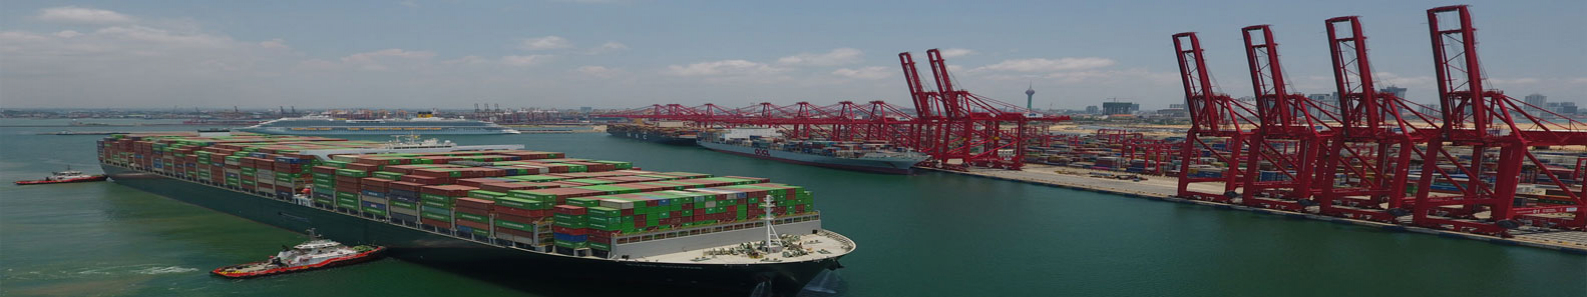 COLOMBO INTERNATIONAL CONTAINER TERMINALS LTD